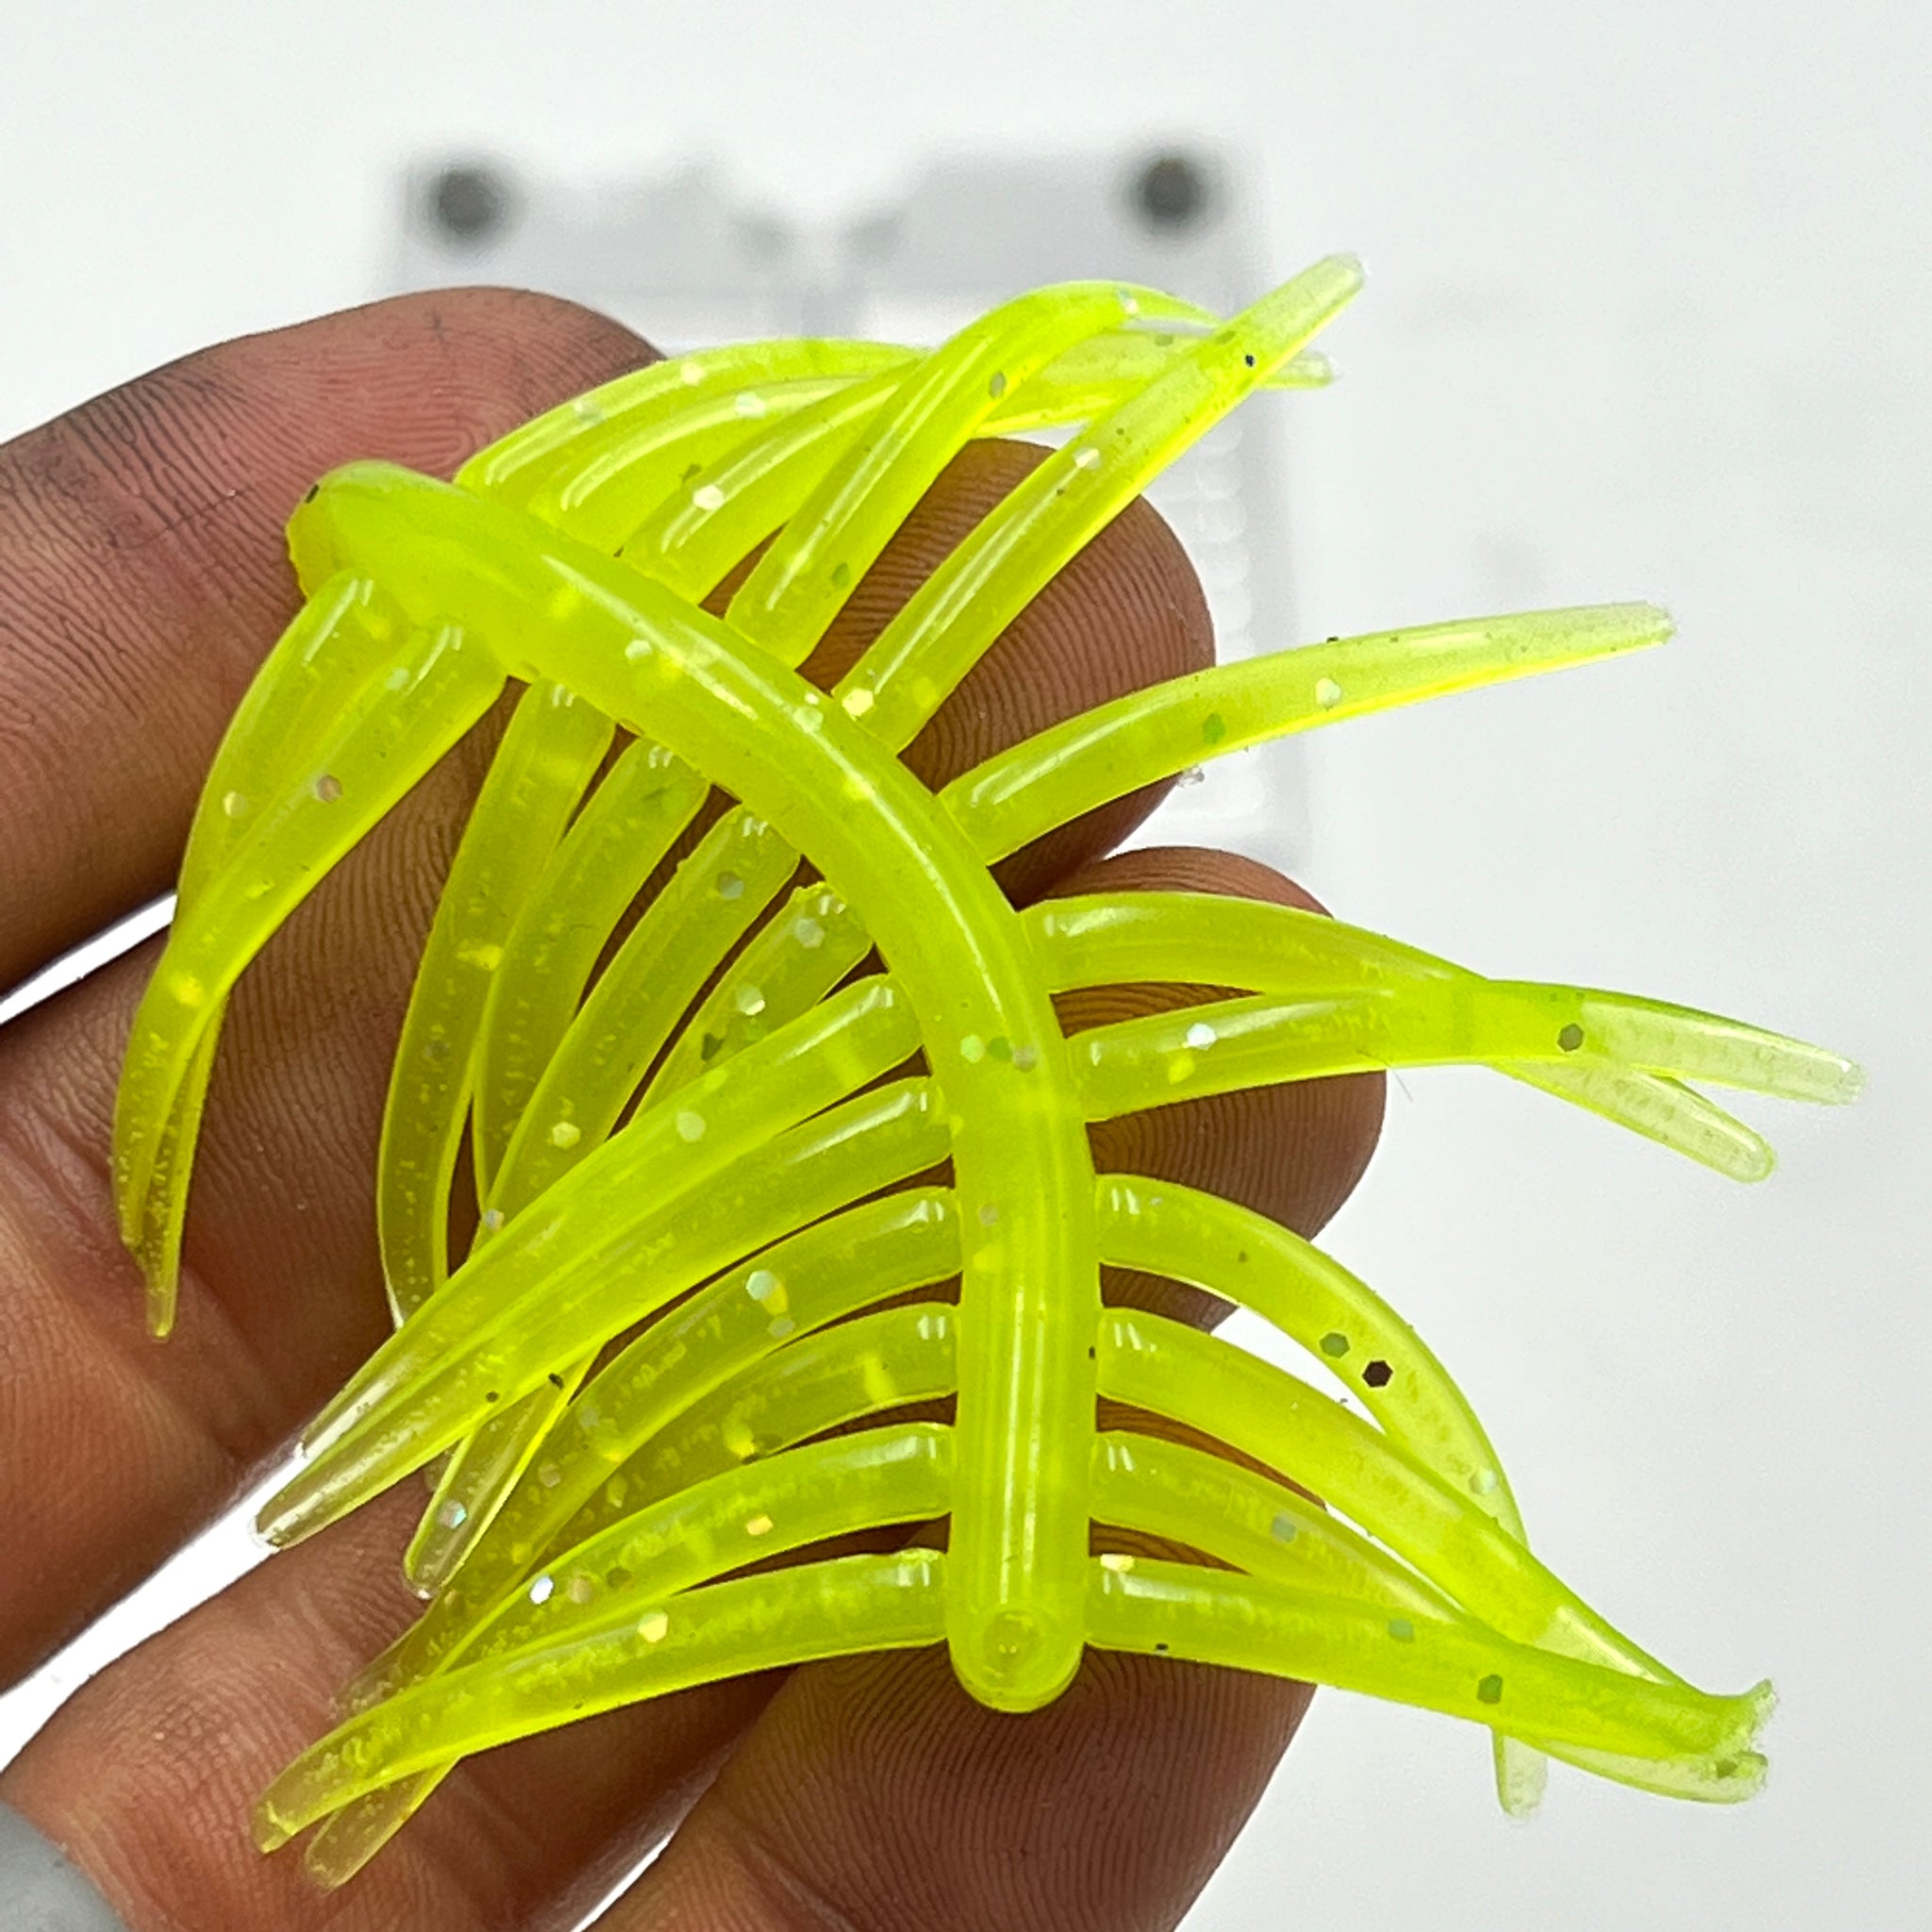 1.2in Crappie Slayer Hand Injection Mold